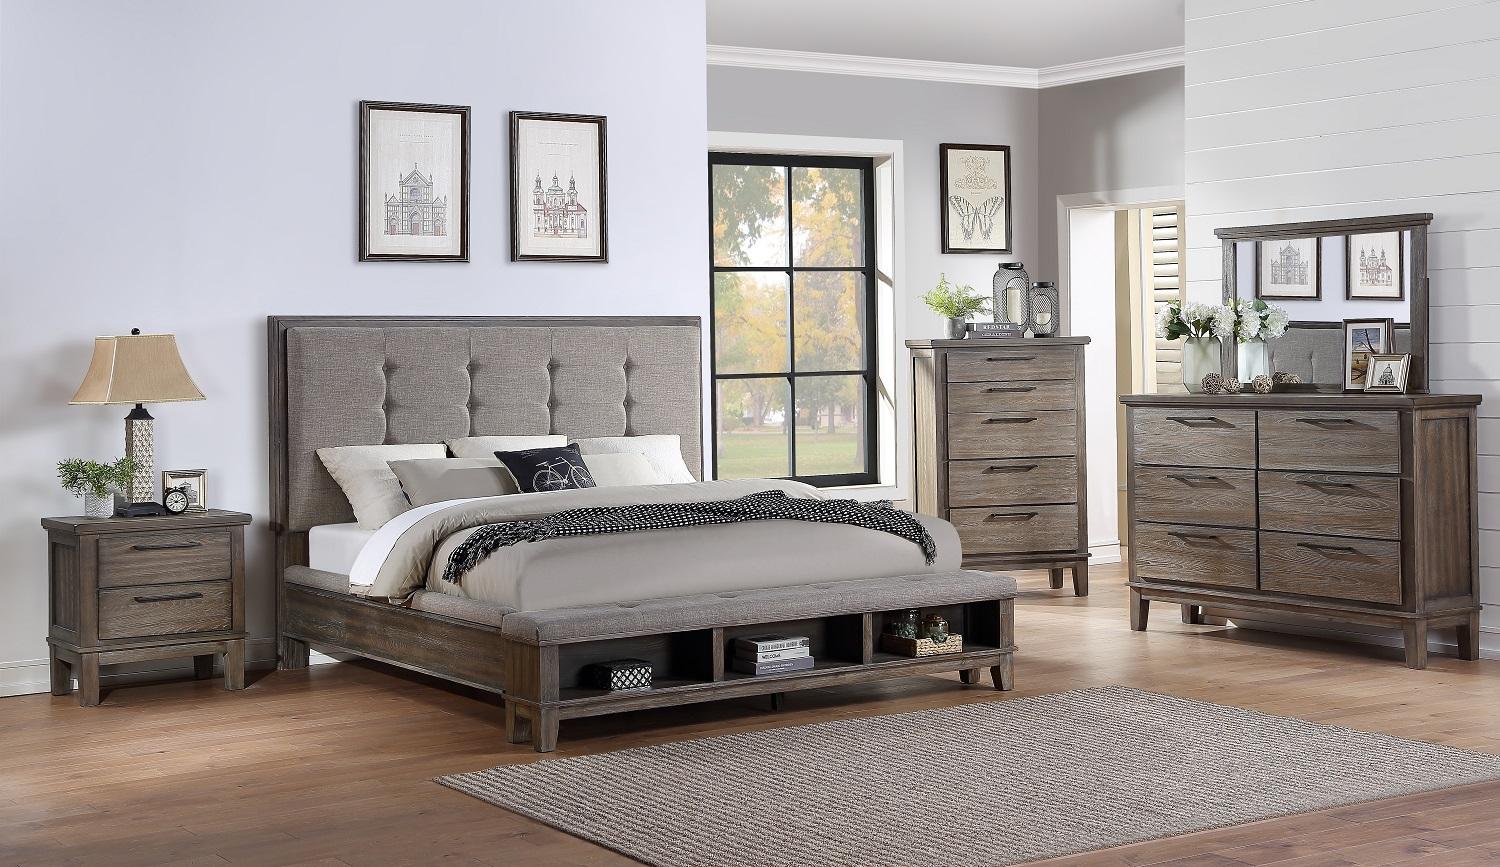 New Classic Furniture Cagney Grey King Platform Bed, Dresser, Mirror & Nightstand